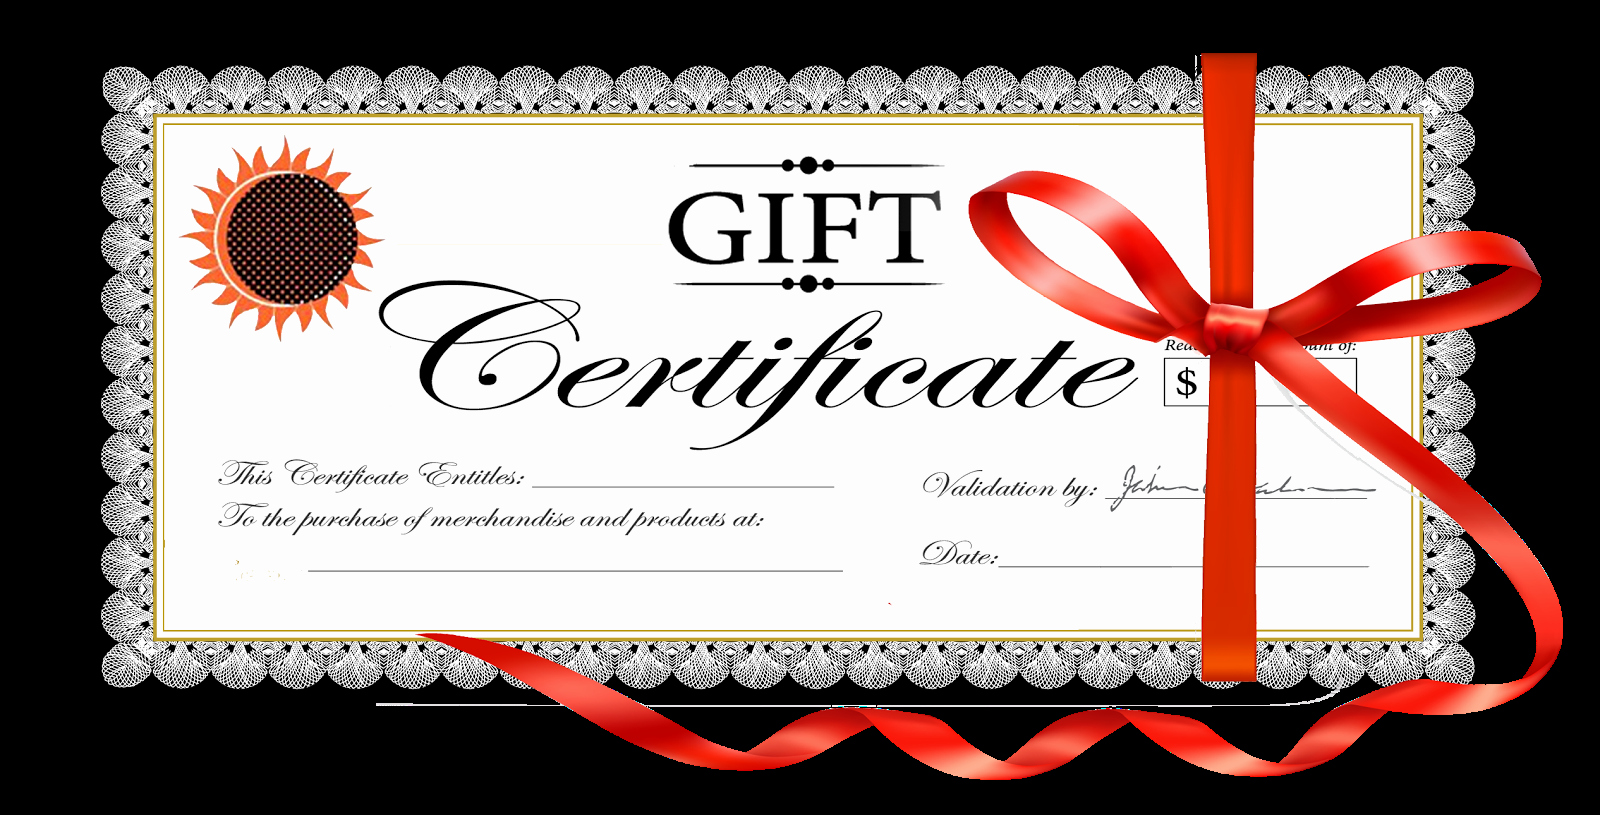 Sample Gift Certificate Wording Awesome 18 Gift Certificate Templates Excel Pdf formats